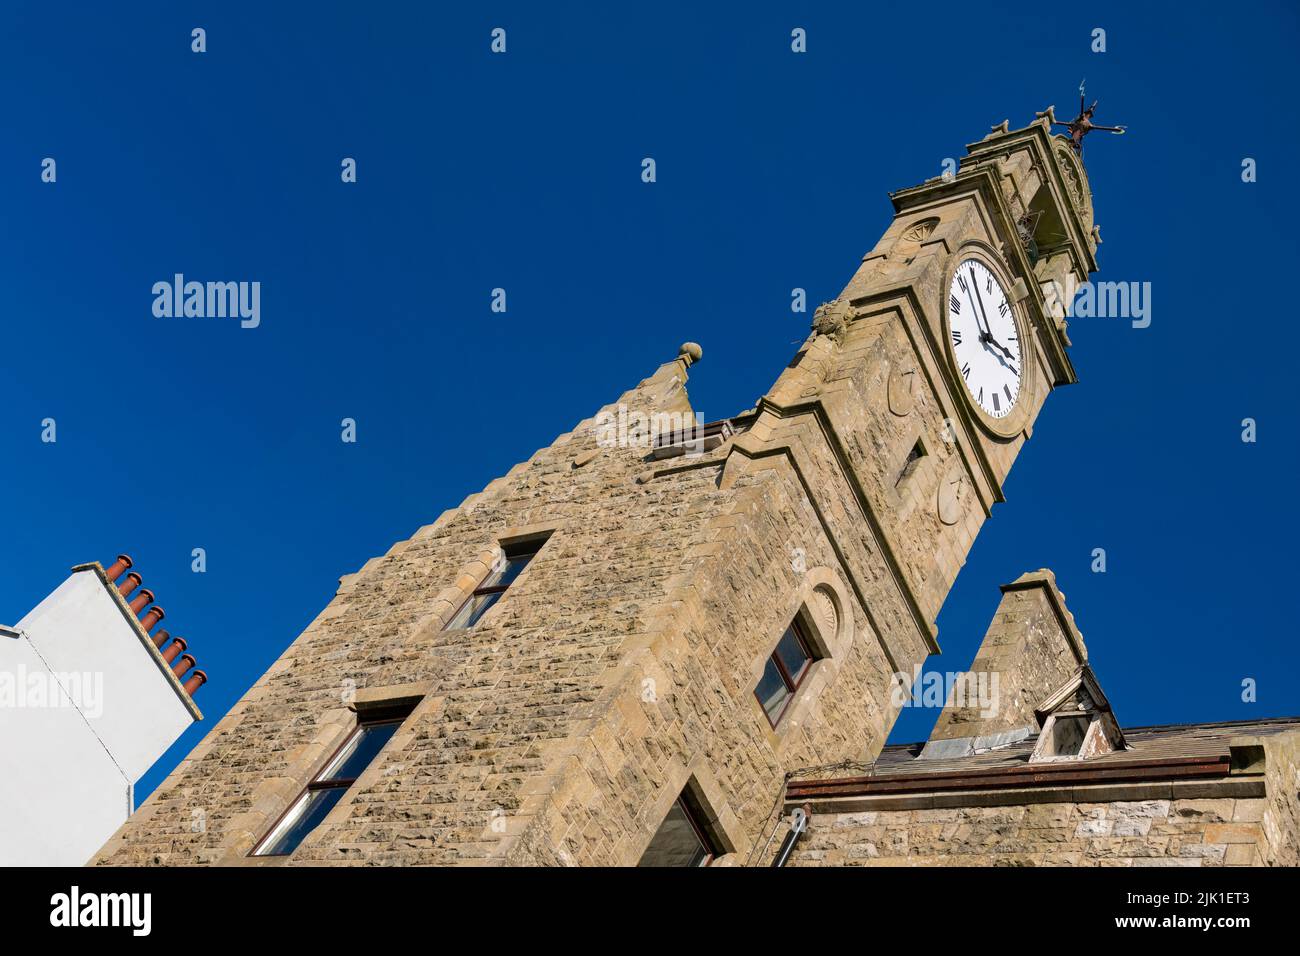 Ireland, County Donegal, Ballyshannon, The Town Clock, Perched at the top of a Scottish style baronial building built in 1878, the tall two-storey clock and bell tower with crow-stepped gables was built for the Belfast Bank who had commenced business in the town in 1869. Stock Photo